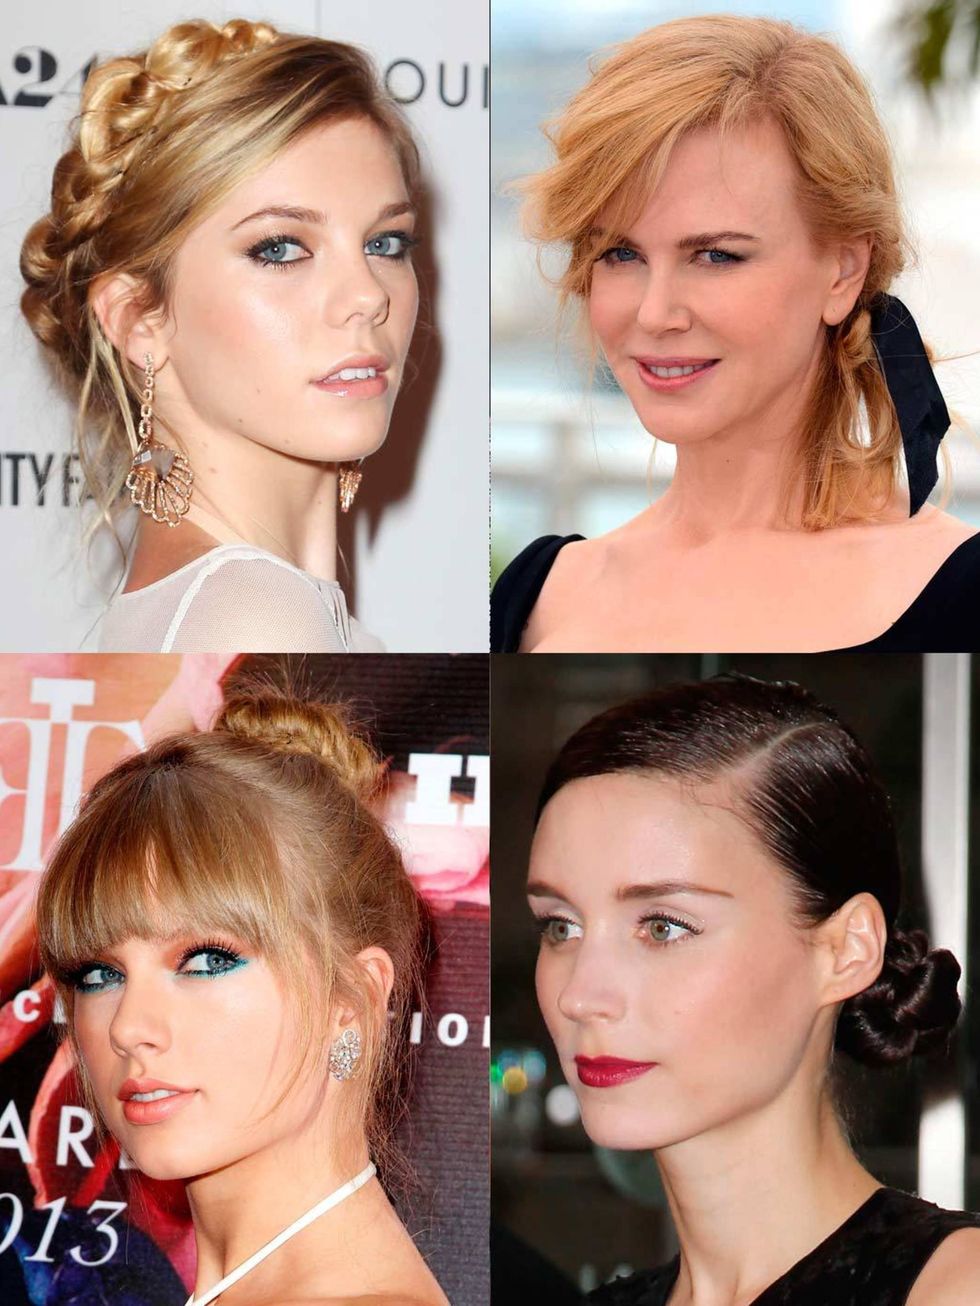 <p>A classic summer <a href="http://www.elleuk.com/beauty/hair/hair-trends/easy-up-dos">up do</a>: party appropriate, neck refreshing (should the sun come out and stay out) and a <a href="http://www.elleuk.com/star-style/celebrity-beauty/celeb-hair/emma-w